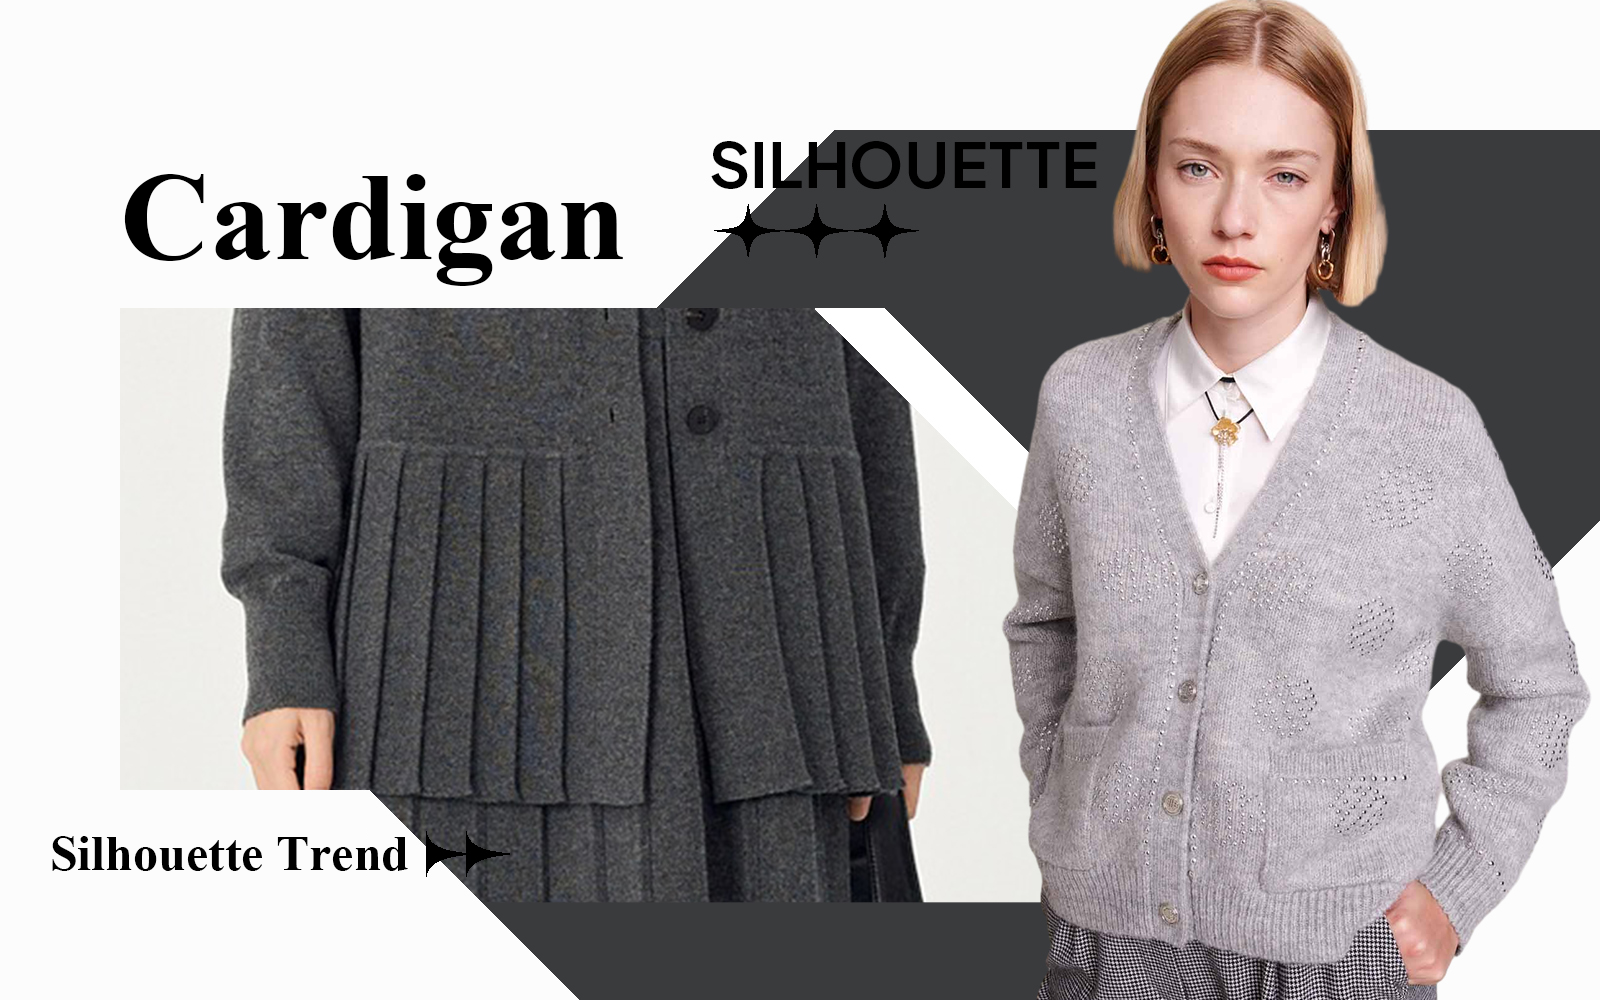 S/S 2025 Silhouette Trend for Women's Cardigan